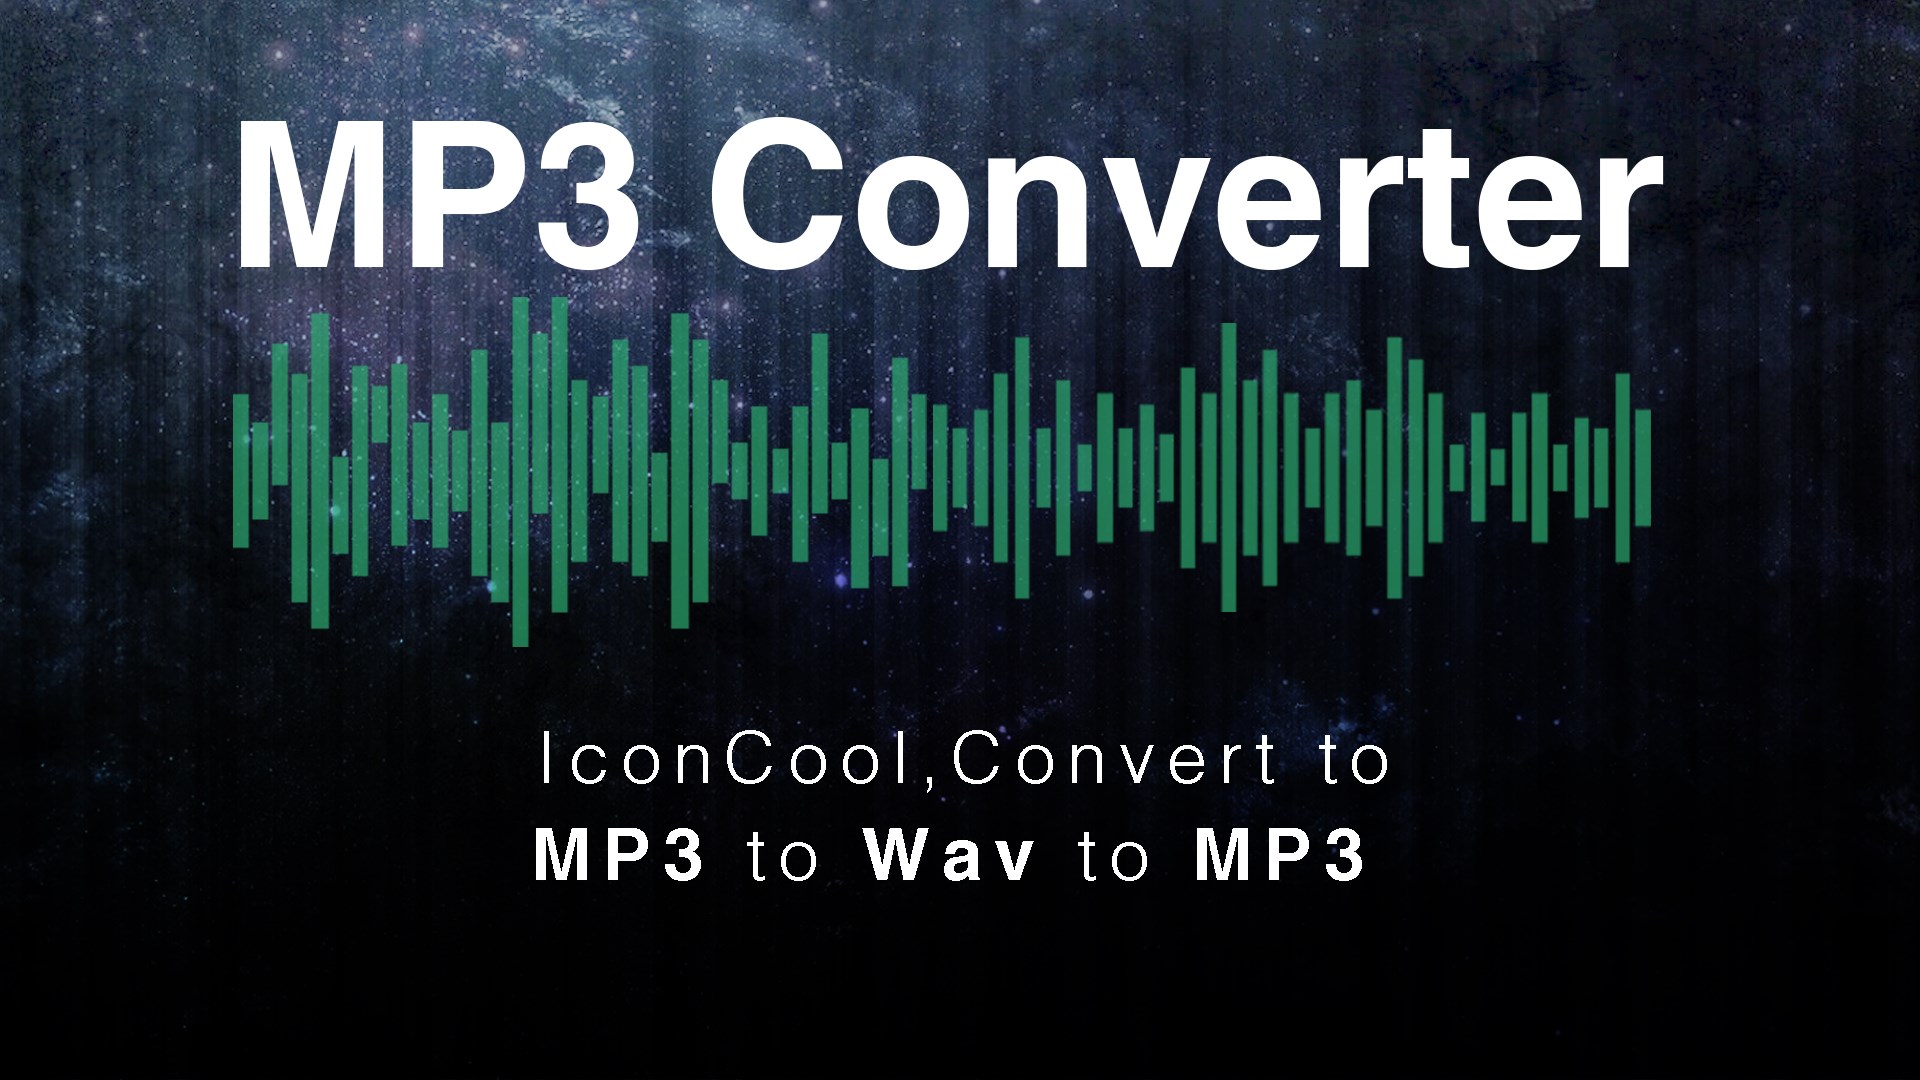 [microsoft-store]-mp3-converter-–-iconcool,convert-to-mp3-to-wav-to-mp3